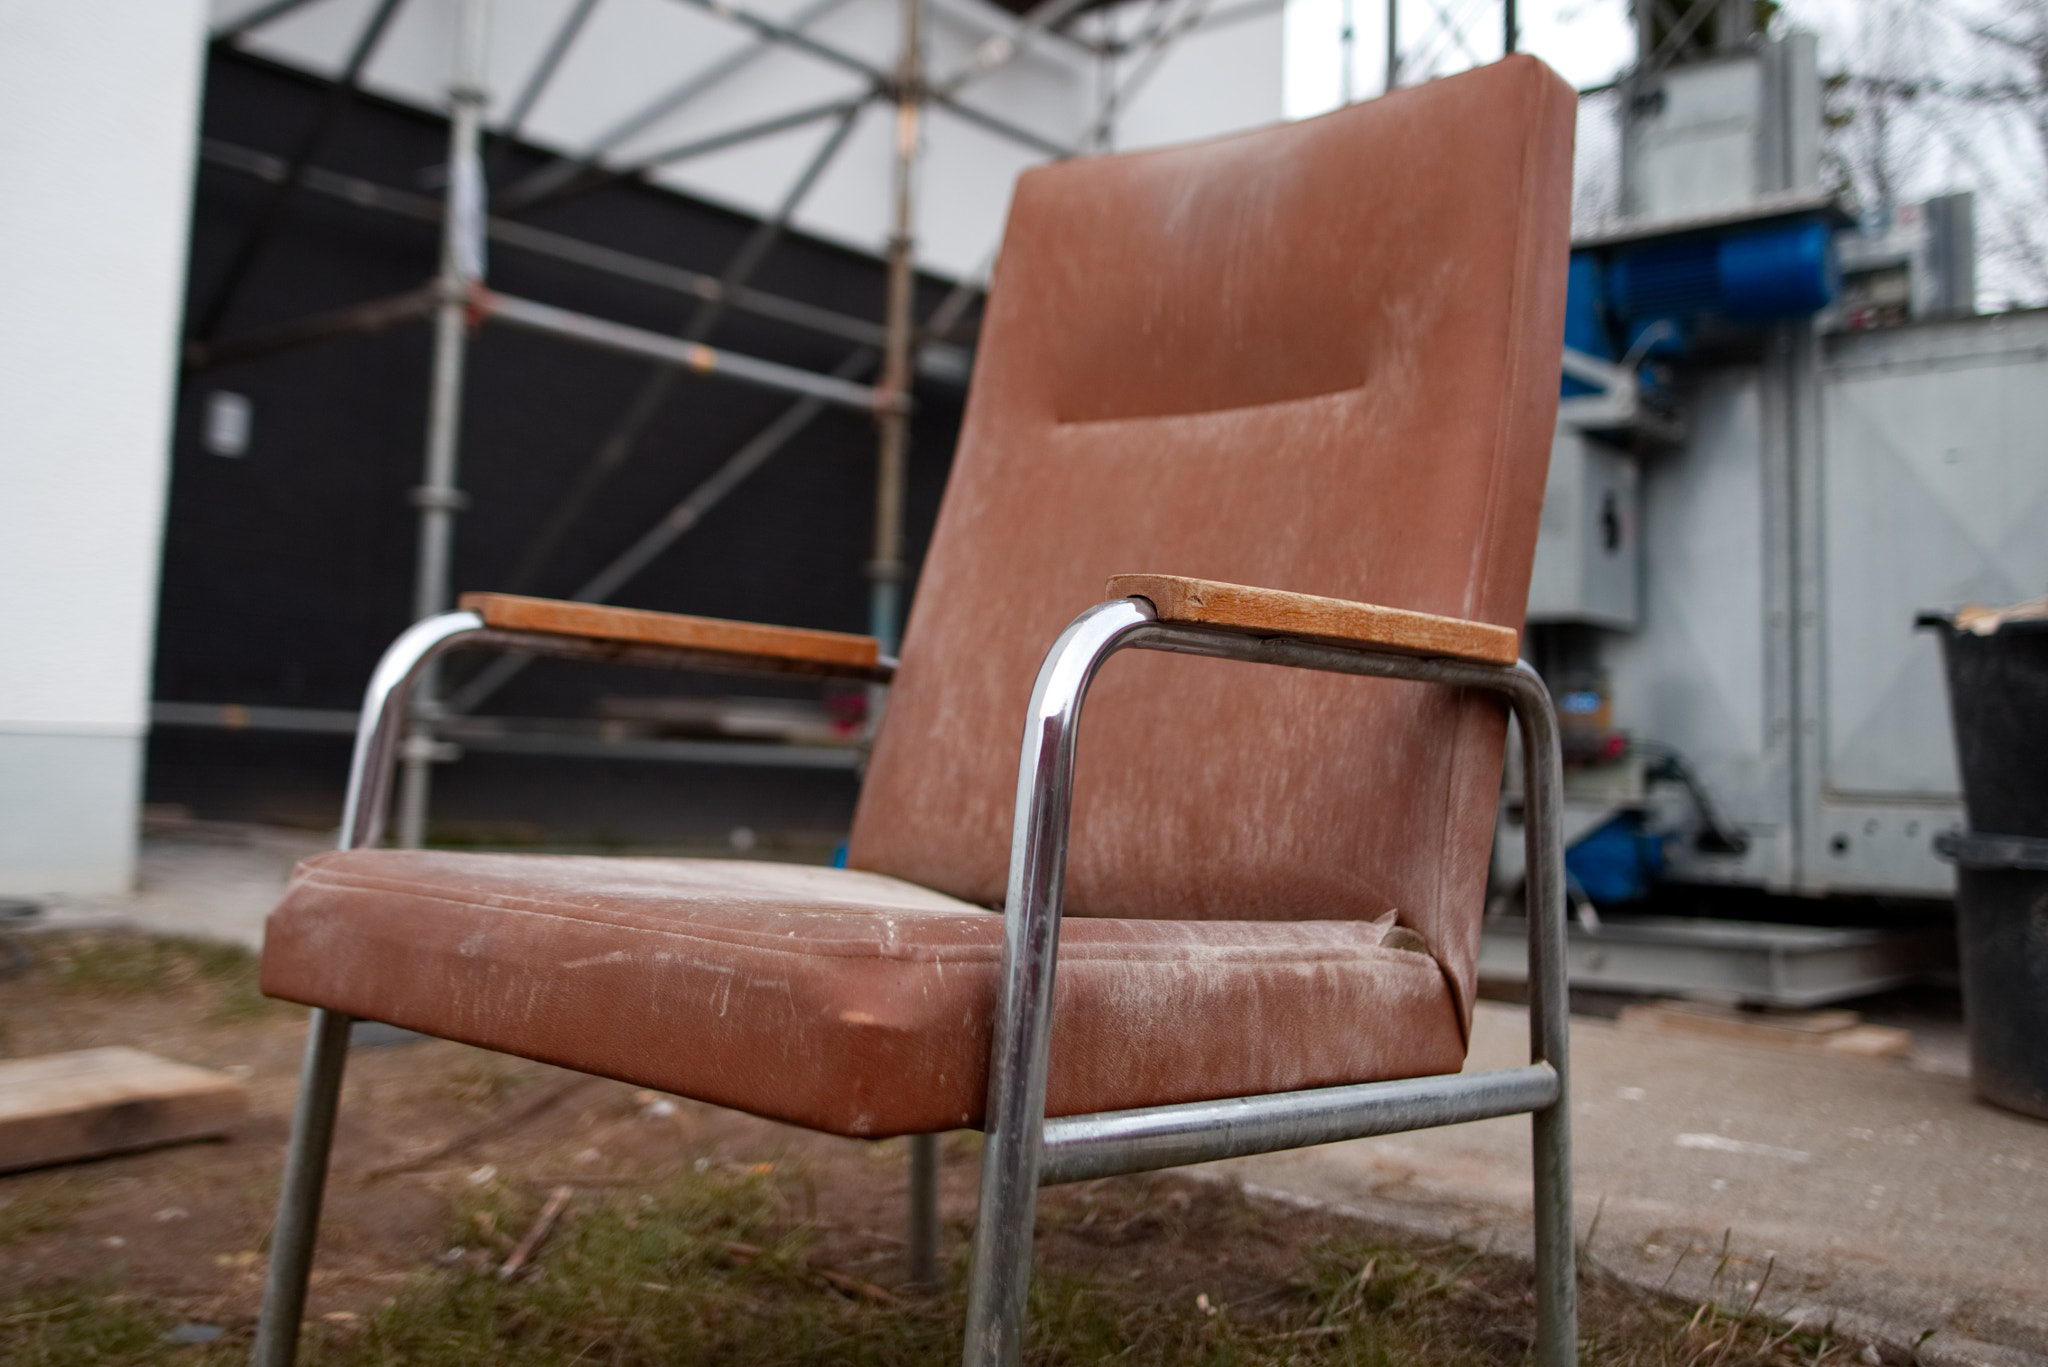 Sigma 28mm f/1.8 DG Macro EX sample photo. Hospital chair in construction site photography